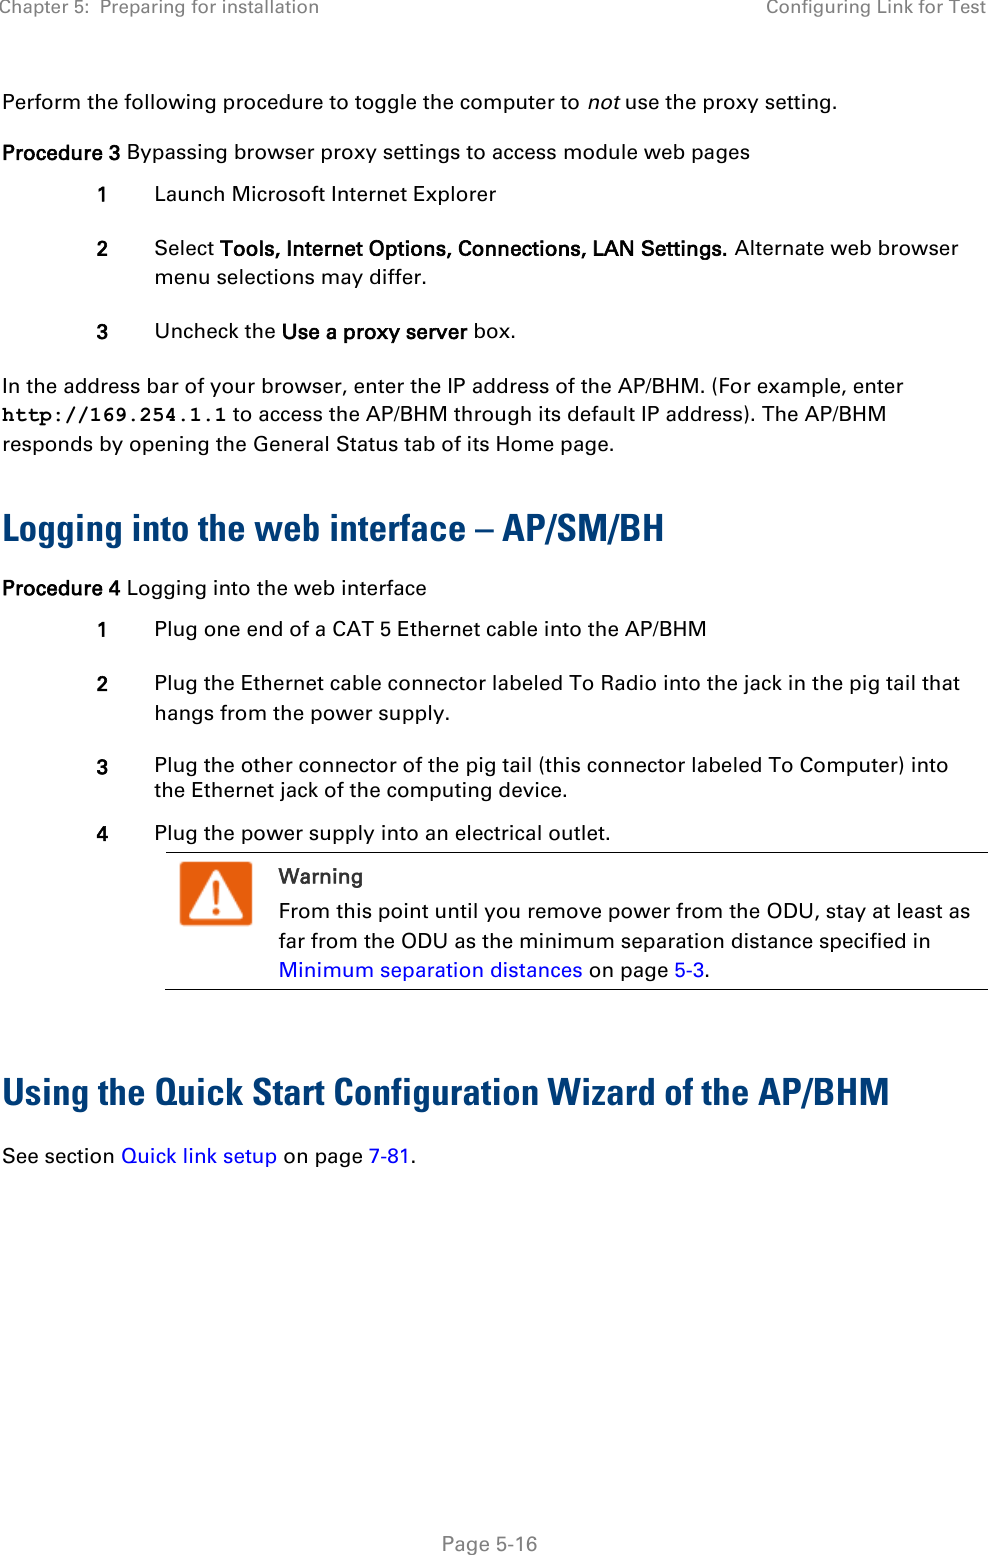 Chapter 5:  Preparing for installation Configuring Link for Test   Page 5-16 Perform the following procedure to toggle the computer to not use the proxy setting. Procedure 3 Bypassing browser proxy settings to access module web pages 1 Launch Microsoft Internet Explorer 2 Select Tools, Internet Options, Connections, LAN Settings. Alternate web browser menu selections may differ. 3 Uncheck the Use a proxy server box. In the address bar of your browser, enter the IP address of the AP/BHM. (For example, enter http://169.254.1.1 to access the AP/BHM through its default IP address). The AP/BHM responds by opening the General Status tab of its Home page.  Logging into the web interface – AP/SM/BH Procedure 4 Logging into the web interface 1 Plug one end of a CAT 5 Ethernet cable into the AP/BHM 2 Plug the Ethernet cable connector labeled To Radio into the jack in the pig tail that hangs from the power supply. 3 Plug the other connector of the pig tail (this connector labeled To Computer) into the Ethernet jack of the computing device. 4 Plug the power supply into an electrical outlet.  Warning From this point until you remove power from the ODU, stay at least as far from the ODU as the minimum separation distance specified in Minimum separation distances on page 5-3.   Using the Quick Start Configuration Wizard of the AP/BHM See section Quick link setup on page 7-81.       